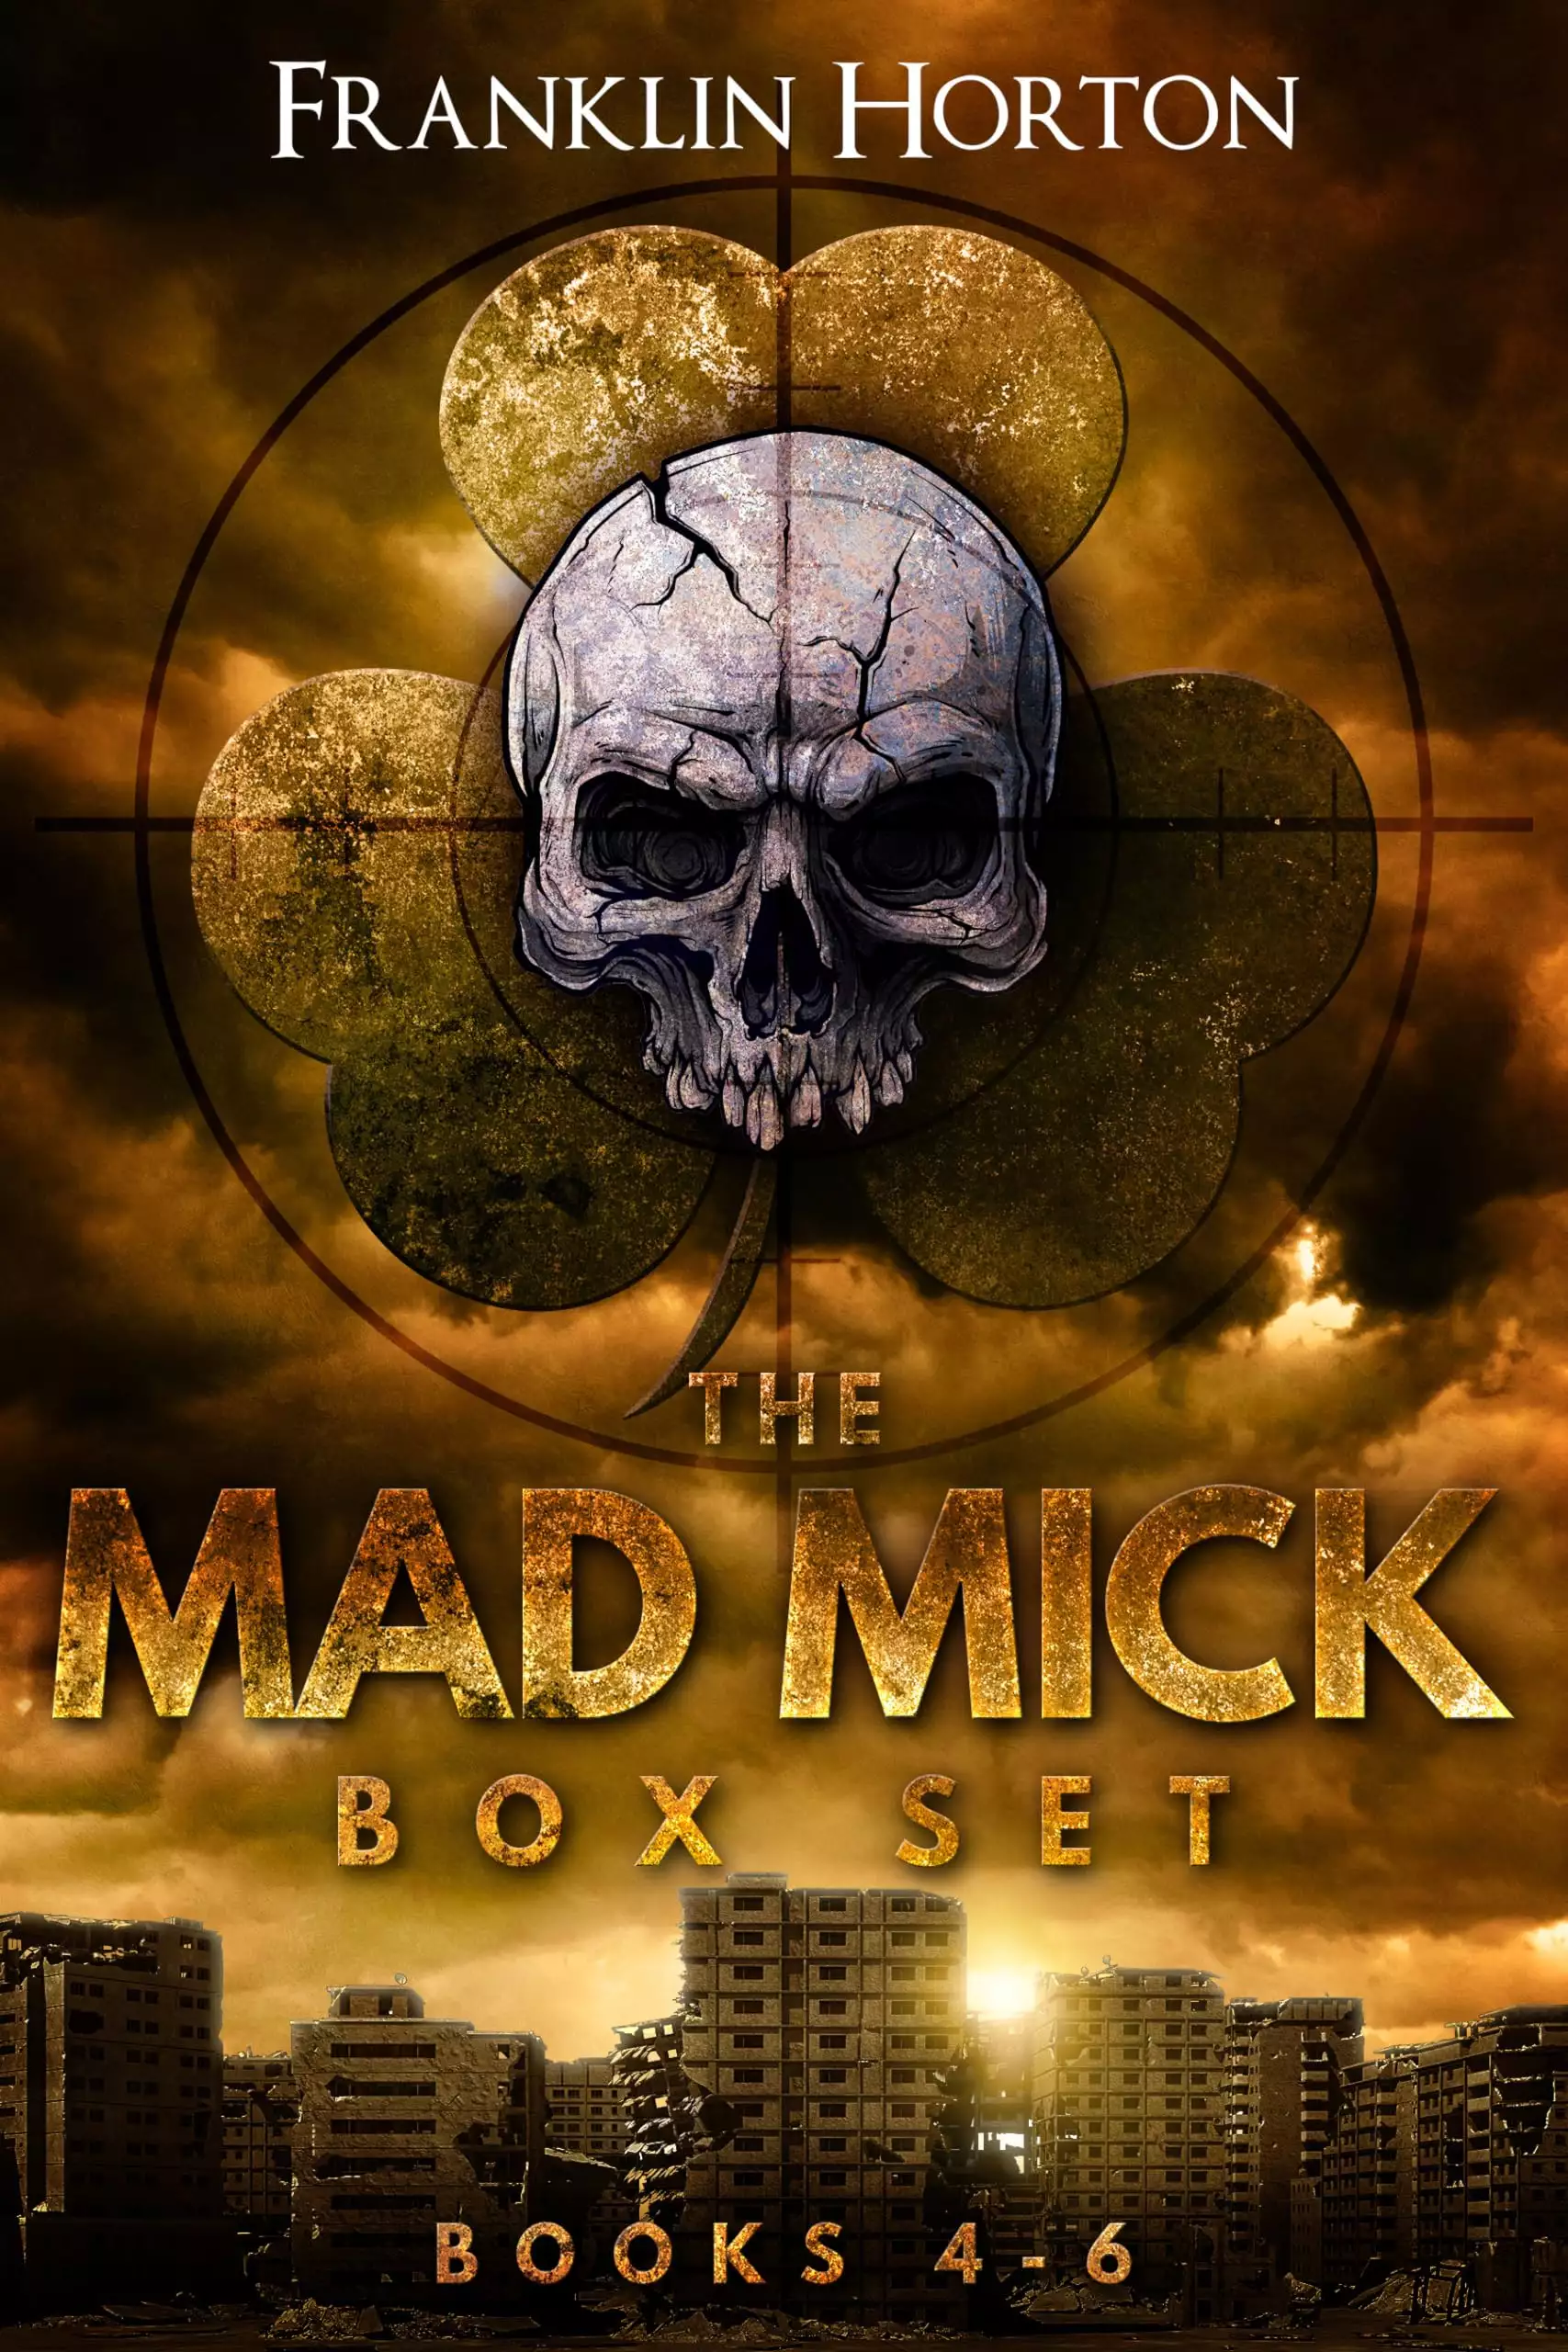 The Mad Mick Box Set Volume 2: Books 4-6 of The Mad Mick Series